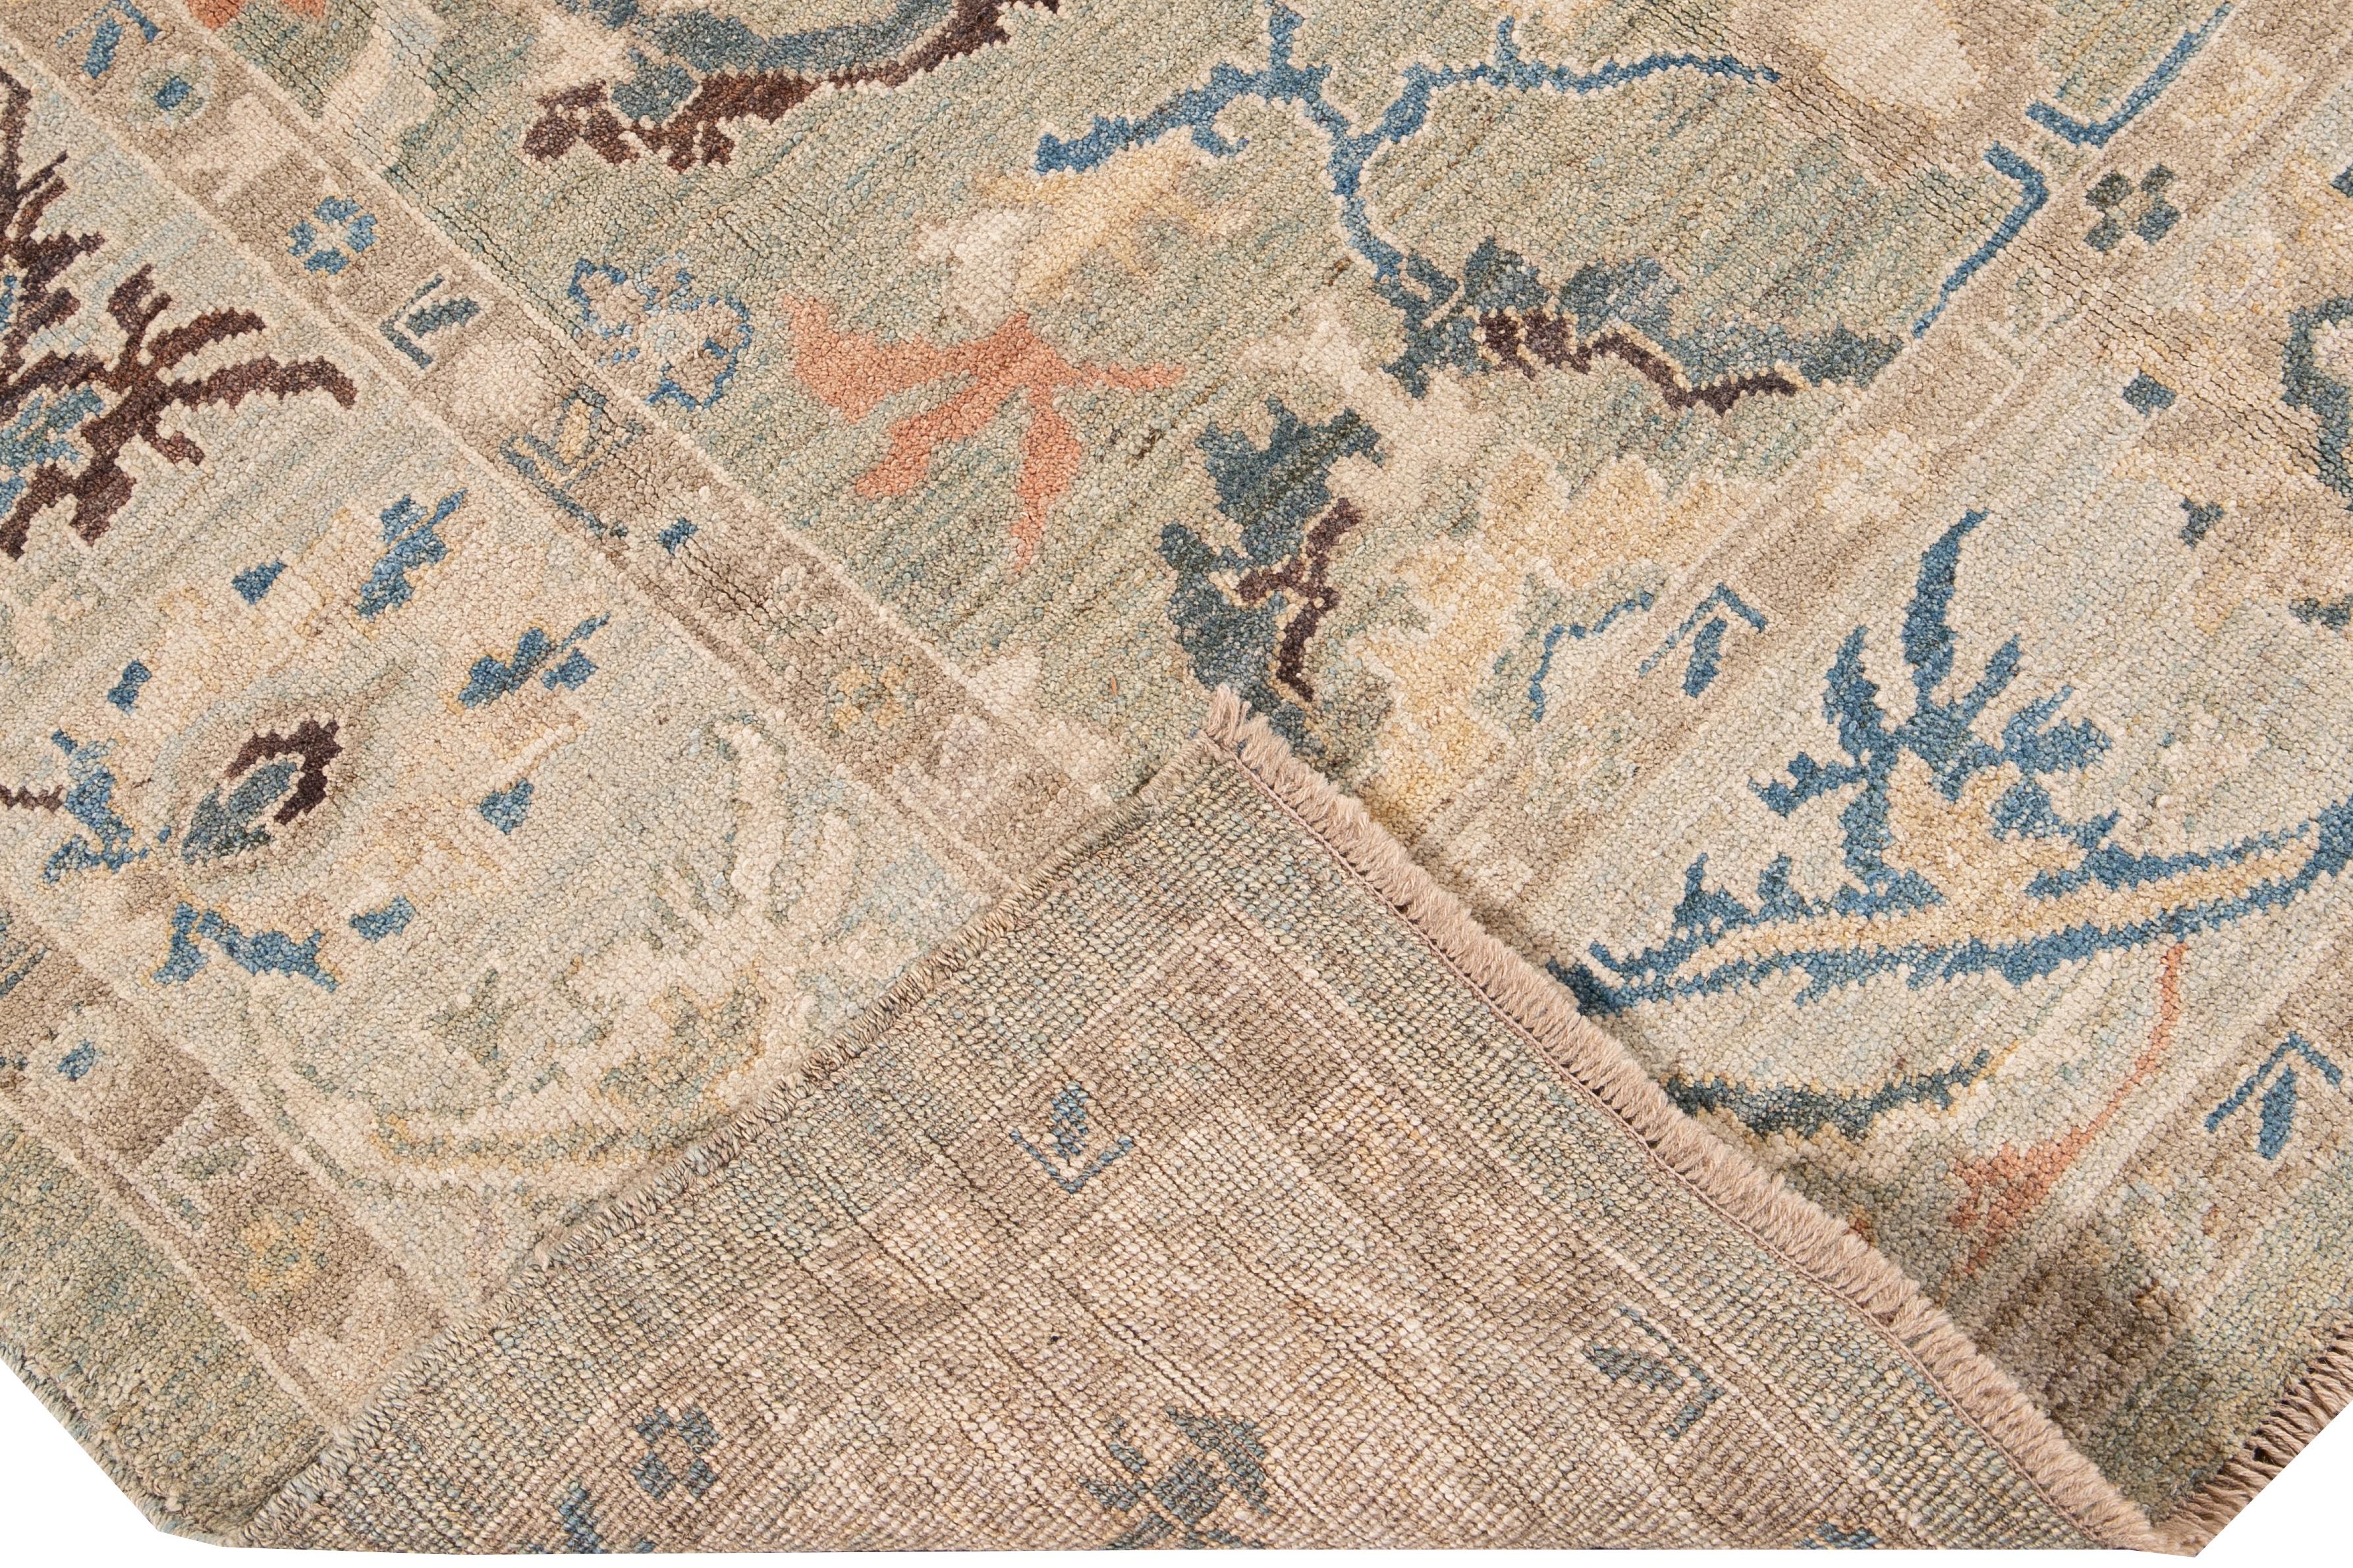 Beautiful modern Sultanabad hand-knotted wool rug with a beige field. This Sultanabad rug has a blue frame and ivory, yellow, blue, and peach accents in a gorgeous all-over Classic geometric floral design.

This rug measures: 6'1